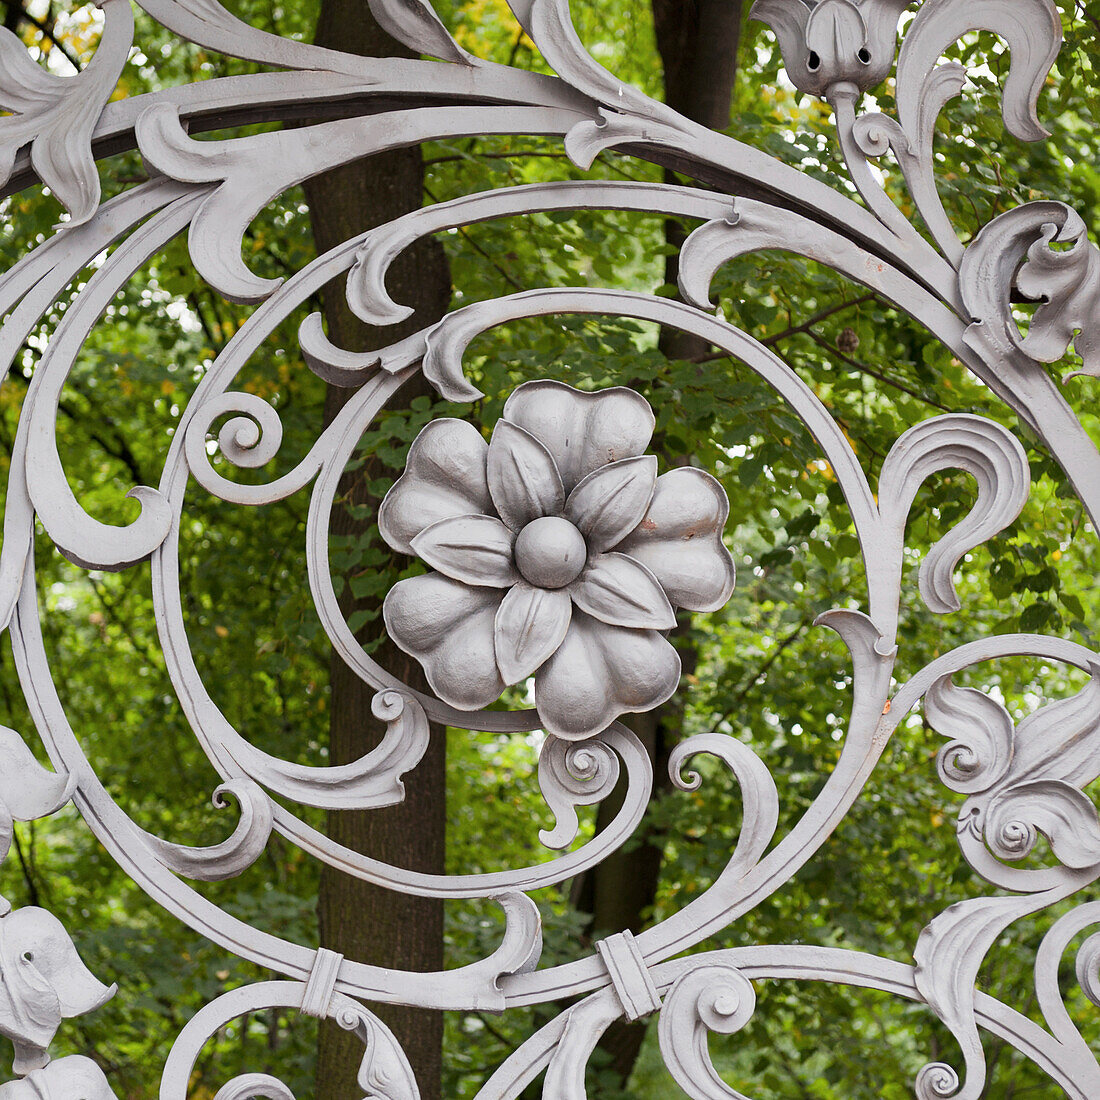 'Flower And Swirl Design On A Metal Gate Of The Cathedral Of The Resurrection Of Christ; St. Petersburg, Russia'